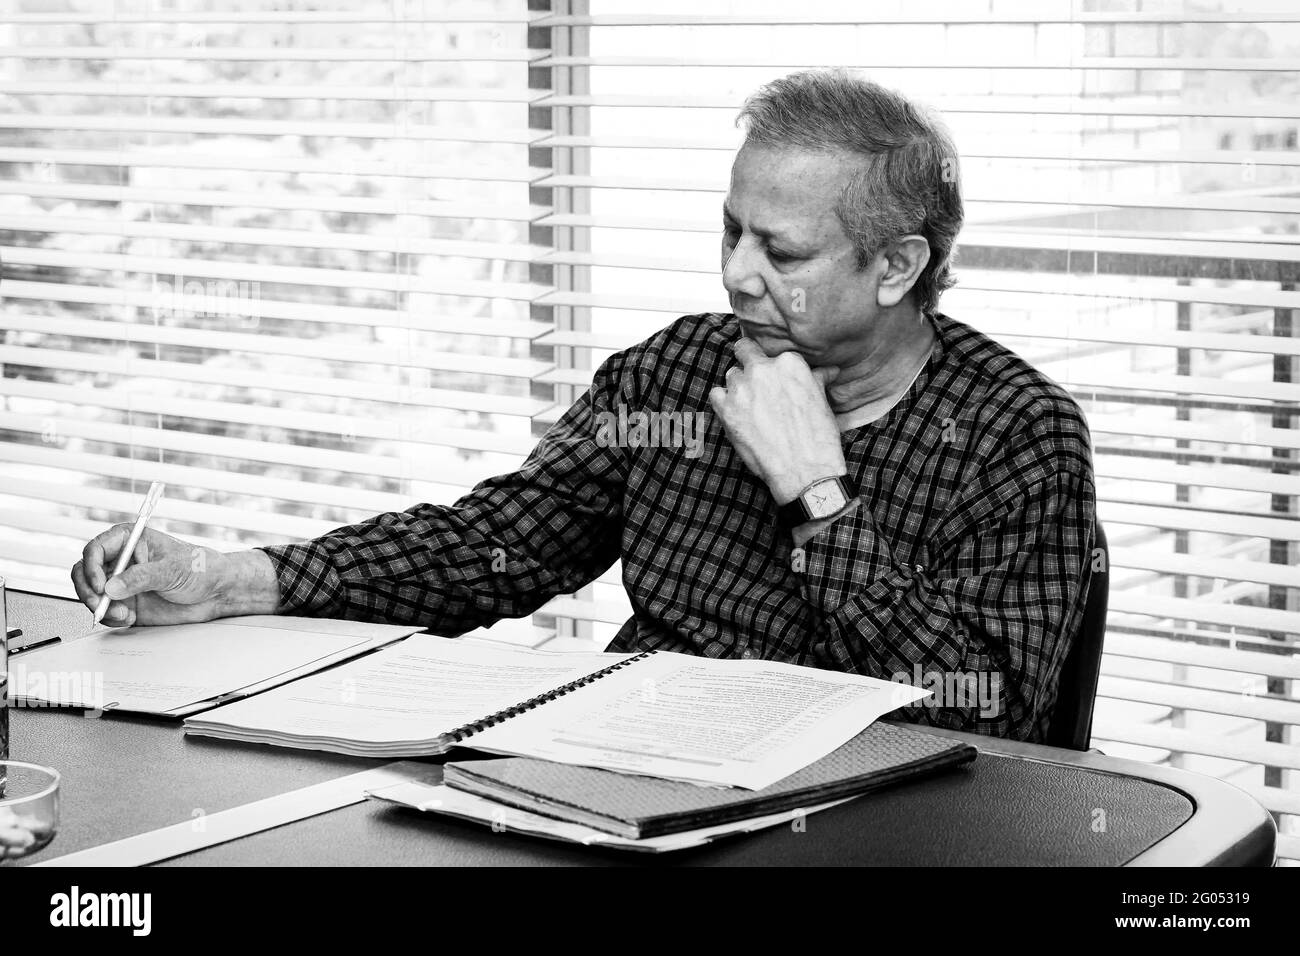 Bangladesh – September 20, 2012: Muhammad Yunus a popular economist and leader is writing on the table at a conference at Grameen centre, Dhaka. Stock Photo